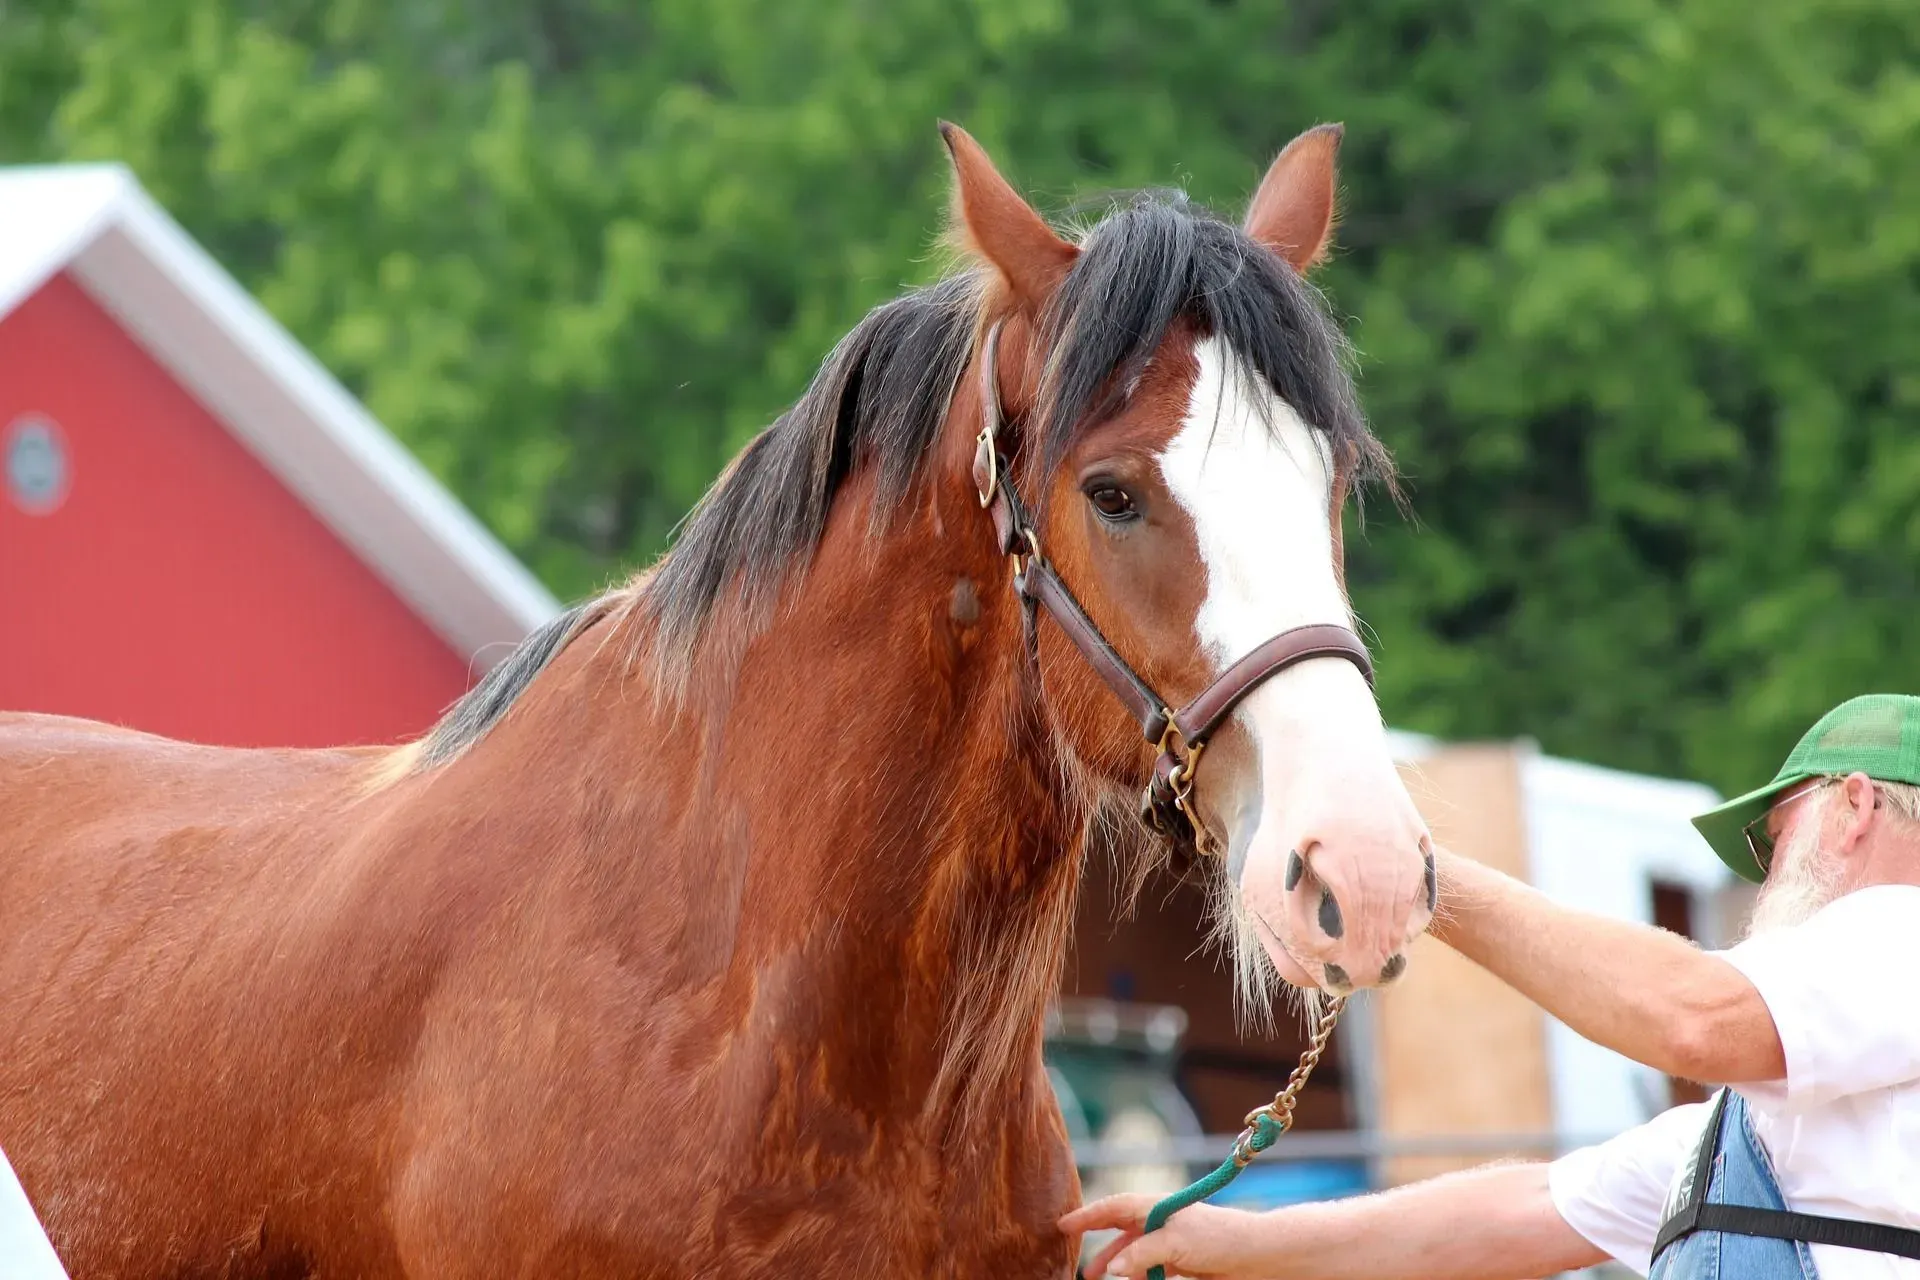 Discover fun facts about the Clydesdale weight and discover facts about the world's largest horses!